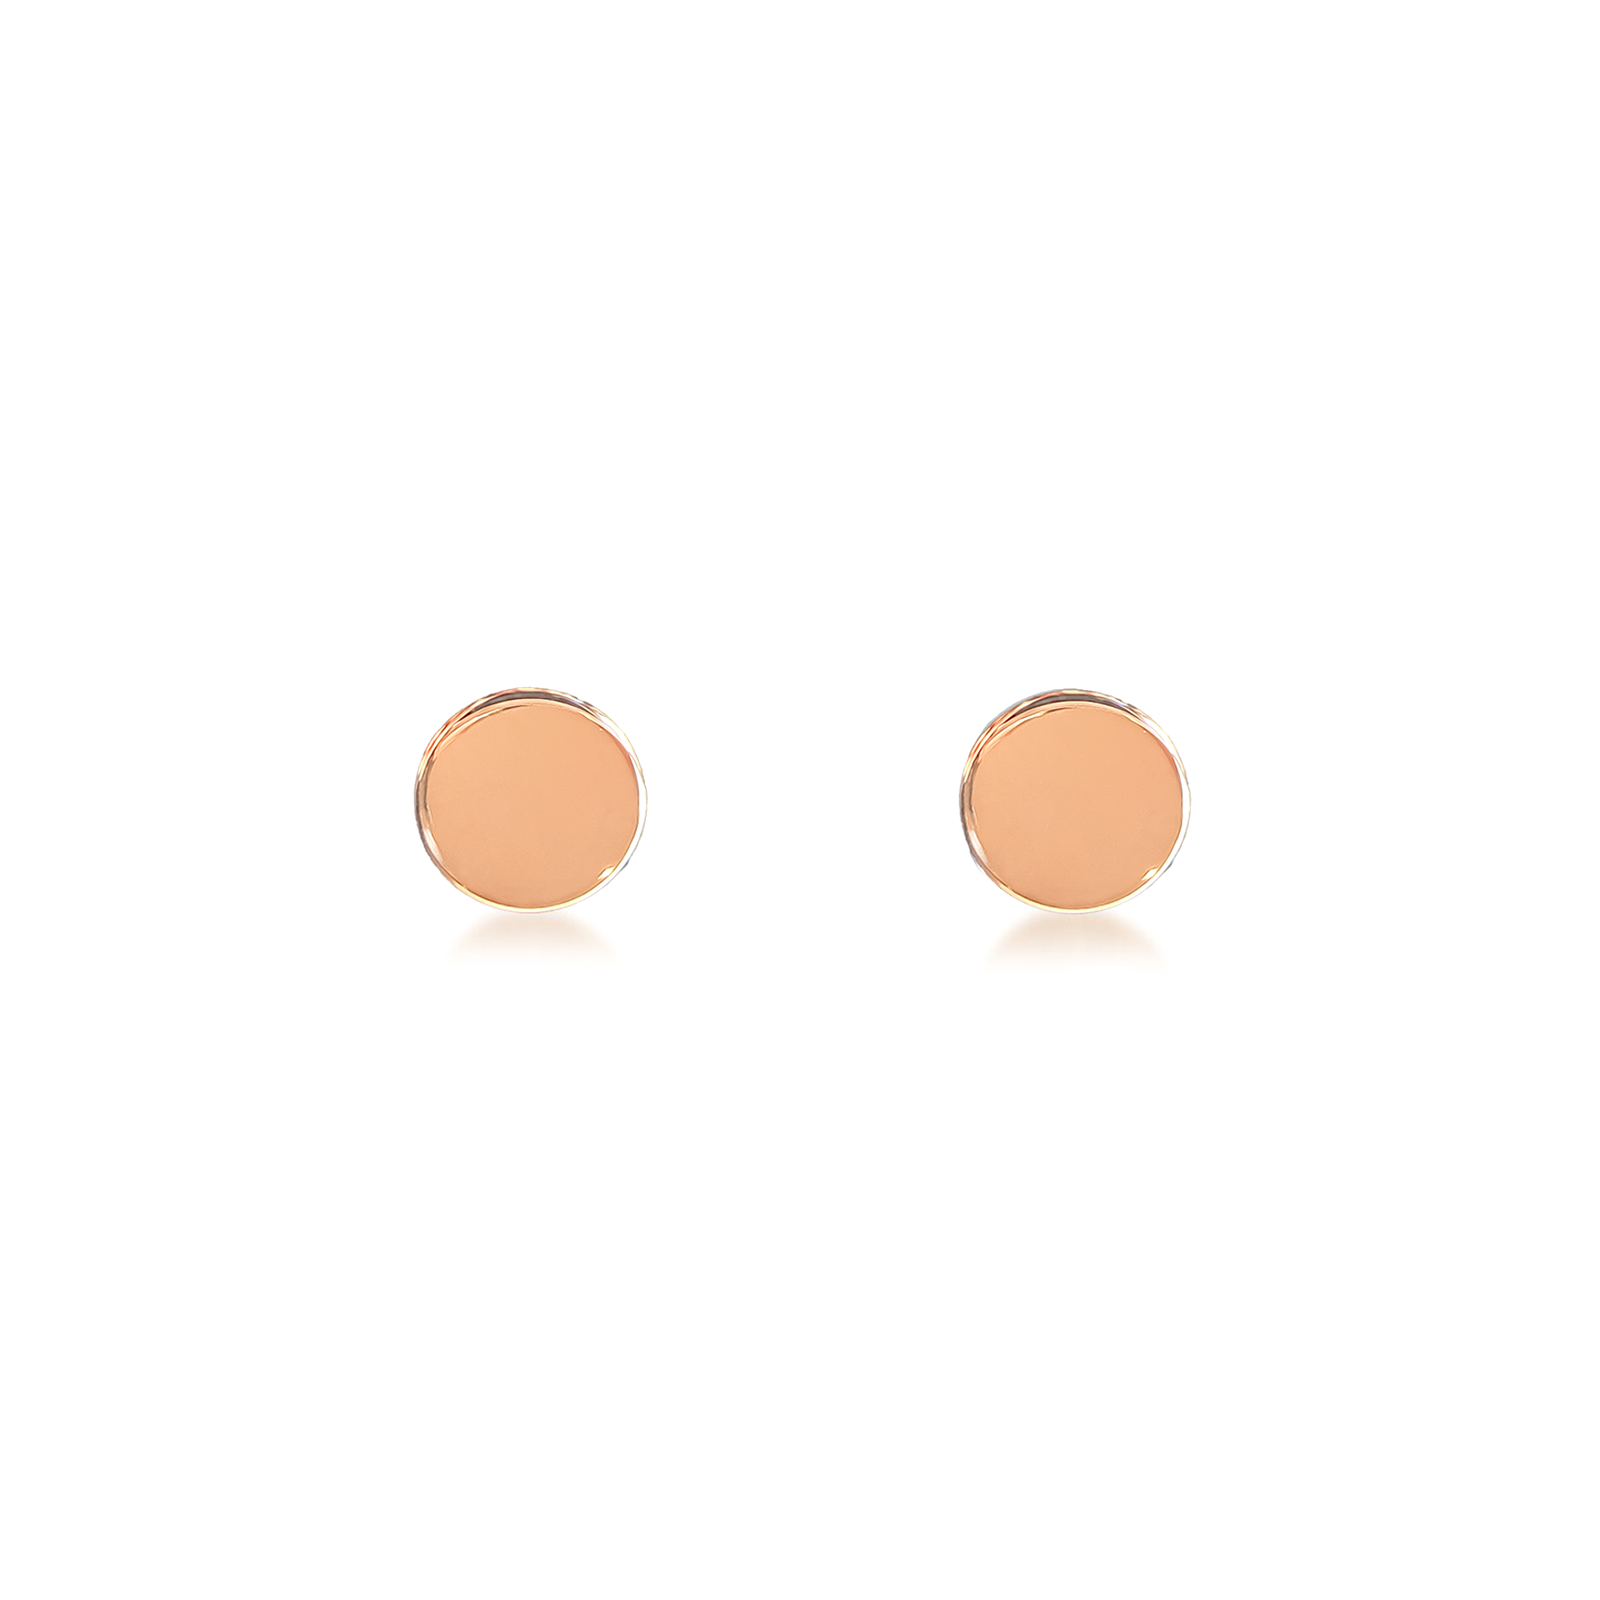 14K Real Gold • 3 mm - 8 mm • Round Ball Polished Earring Studs • Plain  Hollow Gold Ball • With Screw Backing • Baby Kids girl women's •